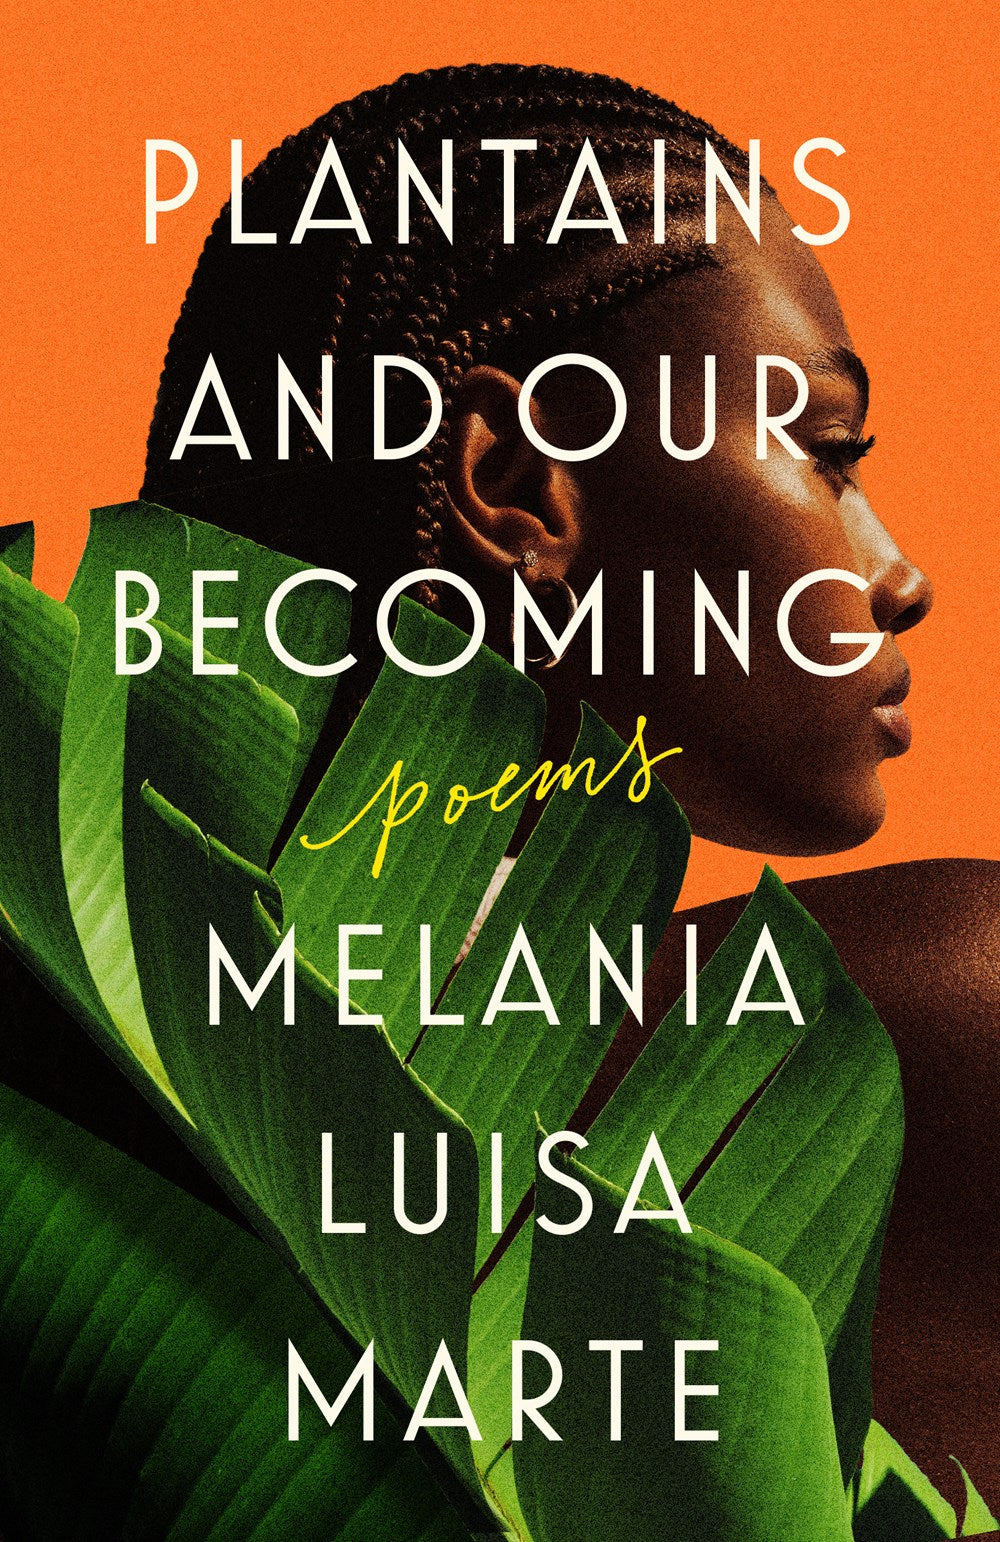 Poems　Becoming:　Kindred　Plantains　and　–　Our　Stories